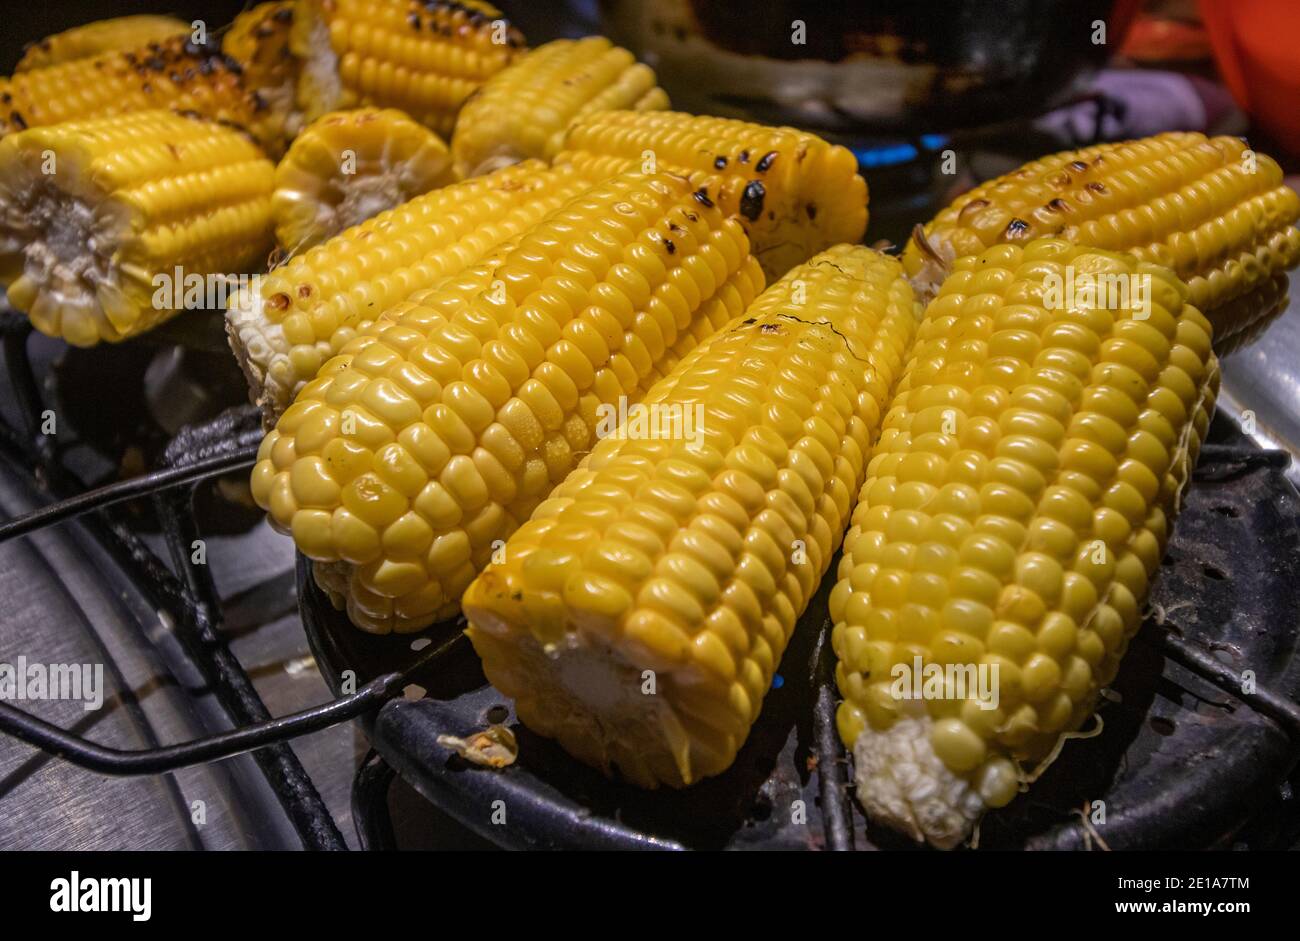 Detailed group of cobs being grilled on a propane gas stove Stock Photo